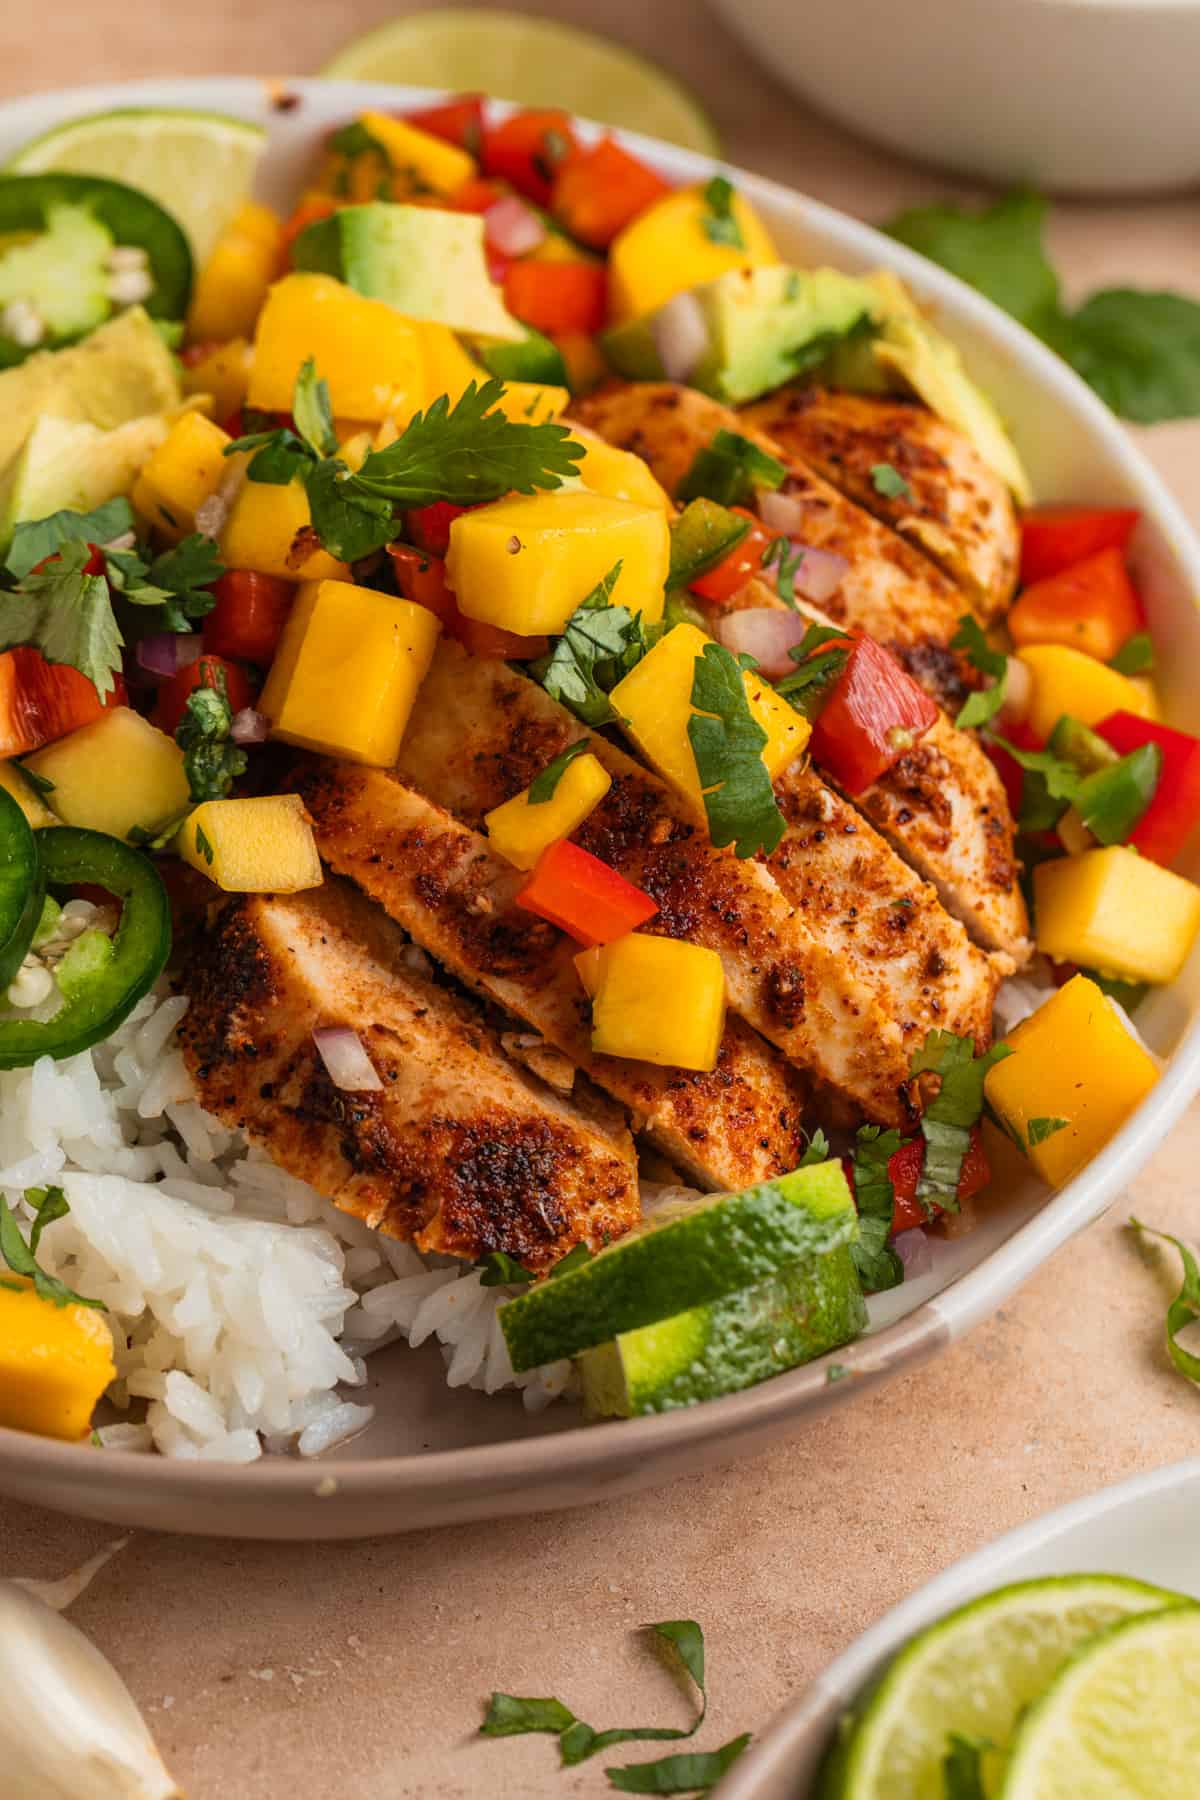 Sliced chicken breast on a bed of rice with mango salsa.